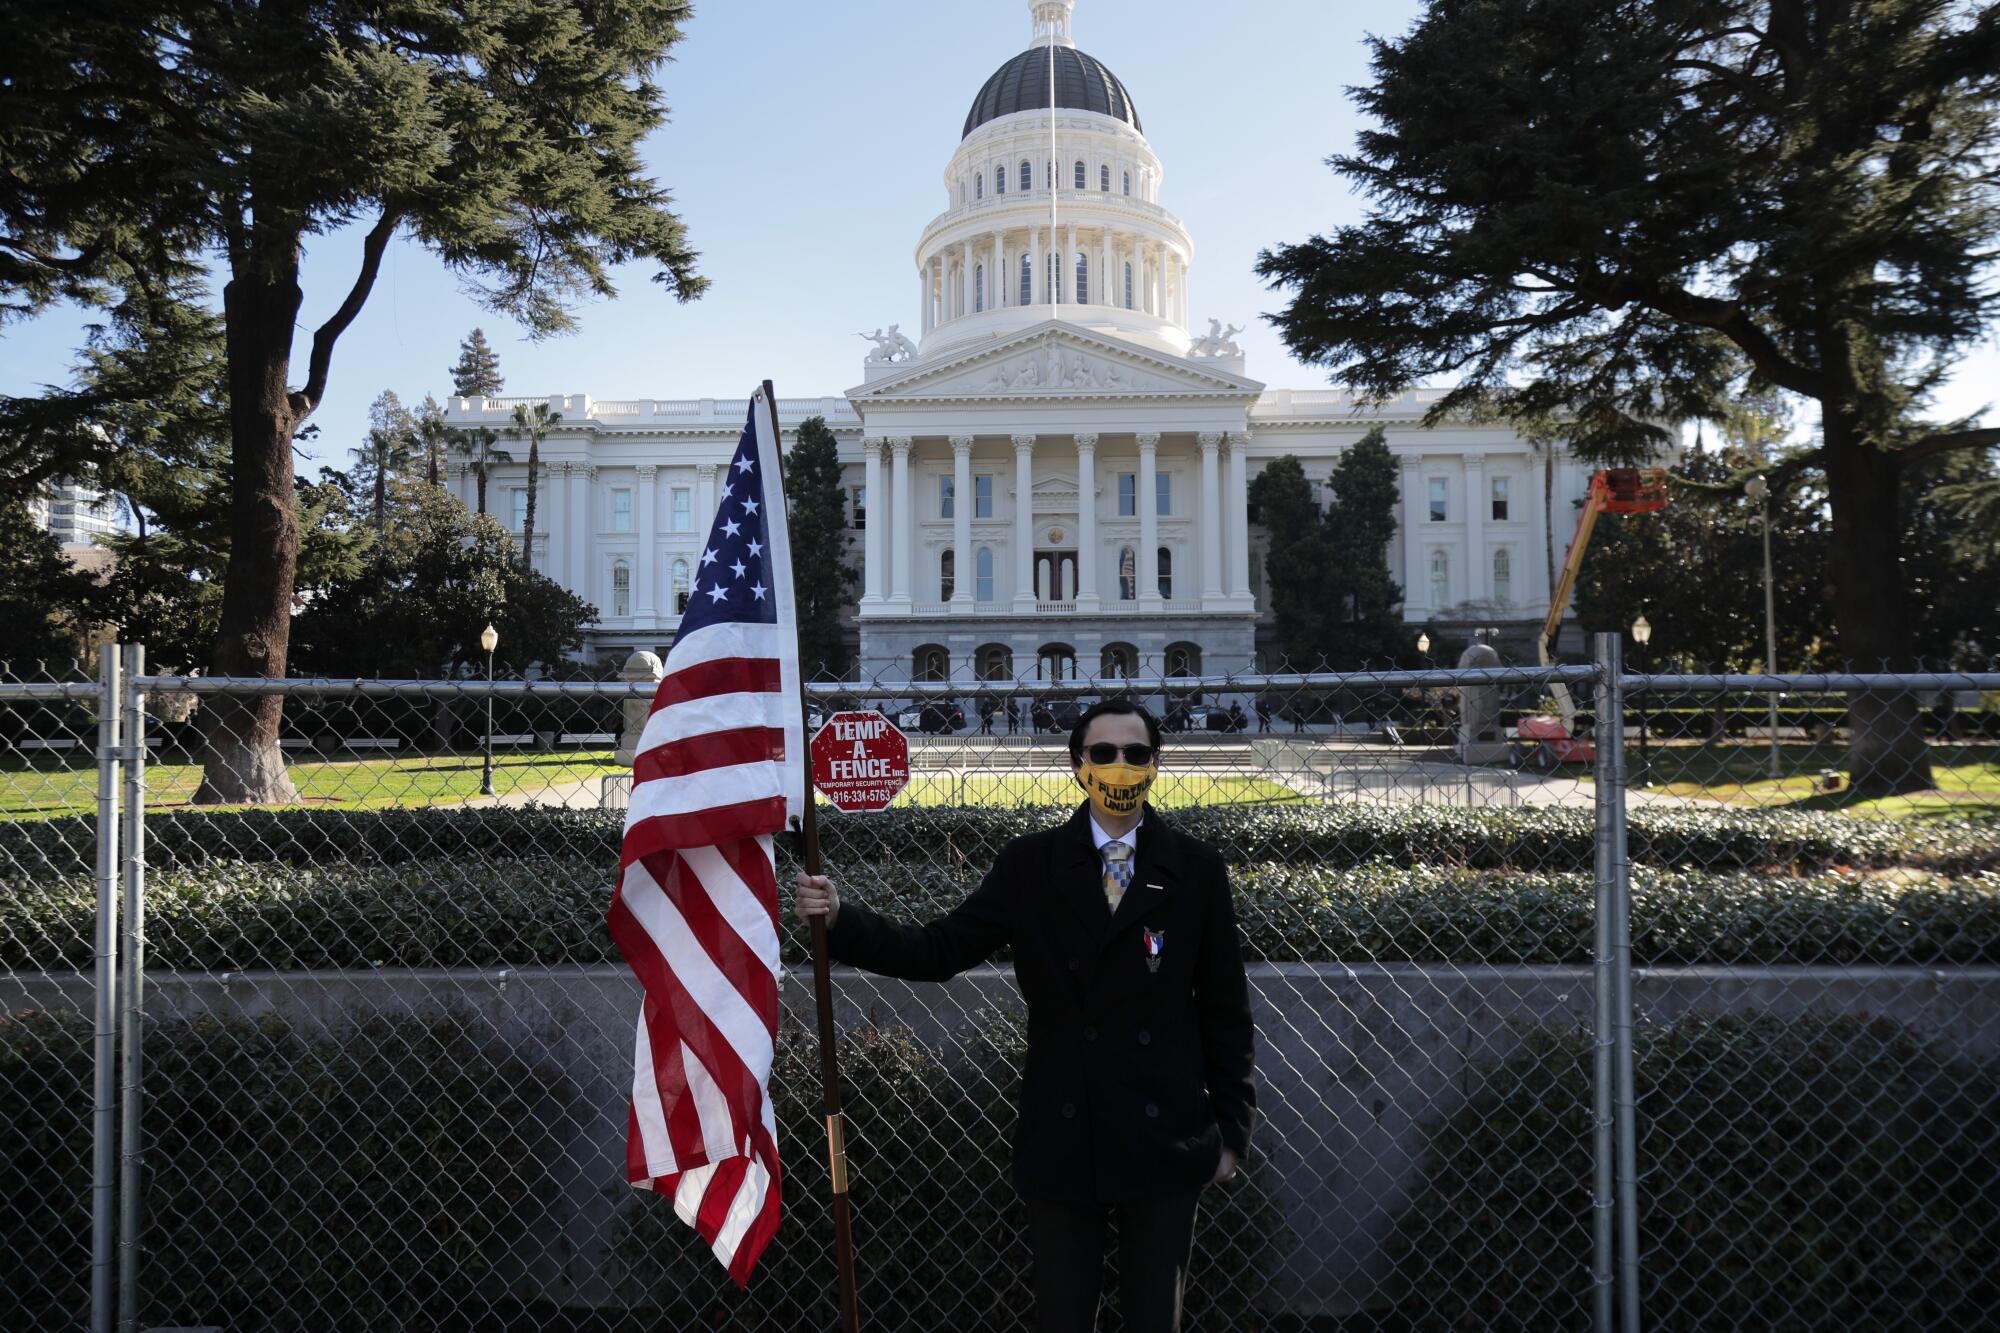 Christian Alvarado stands with an American flag in solidarity with police and legislators near the Capitol in Sacramento.